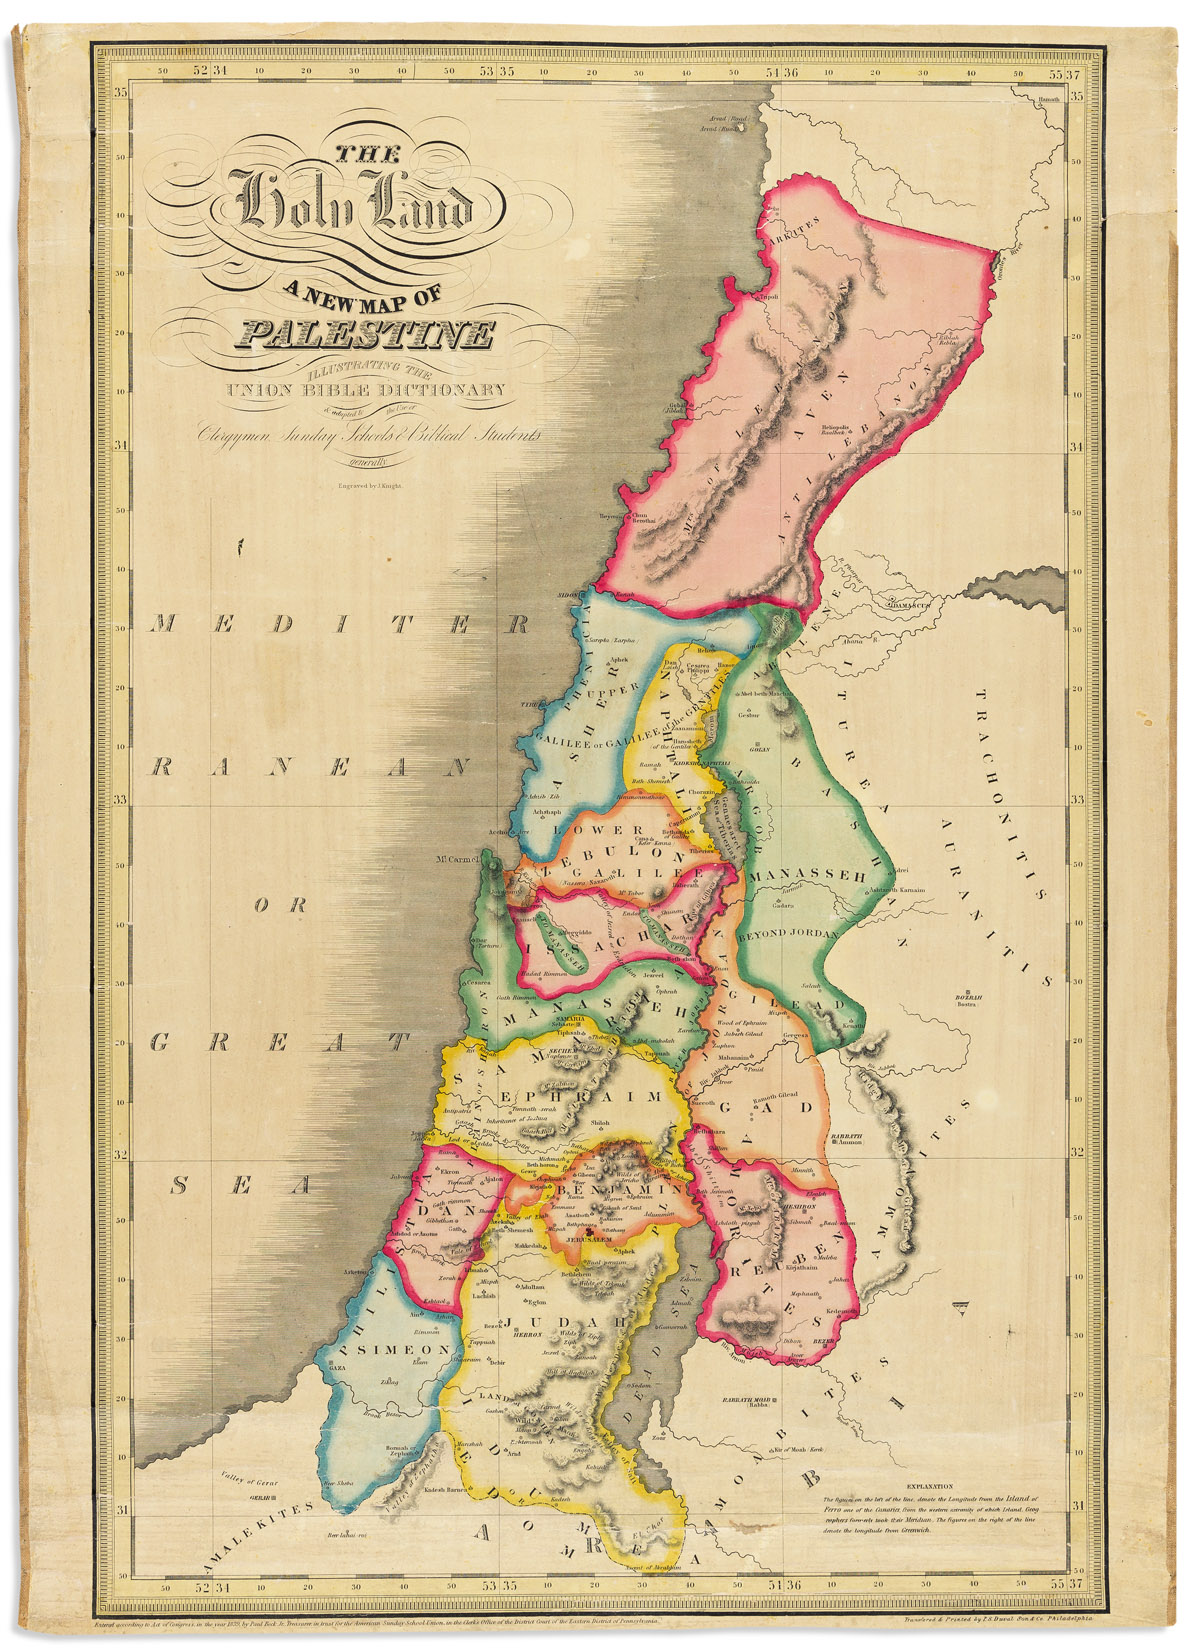 The Holy Land - A New Map of Palestine